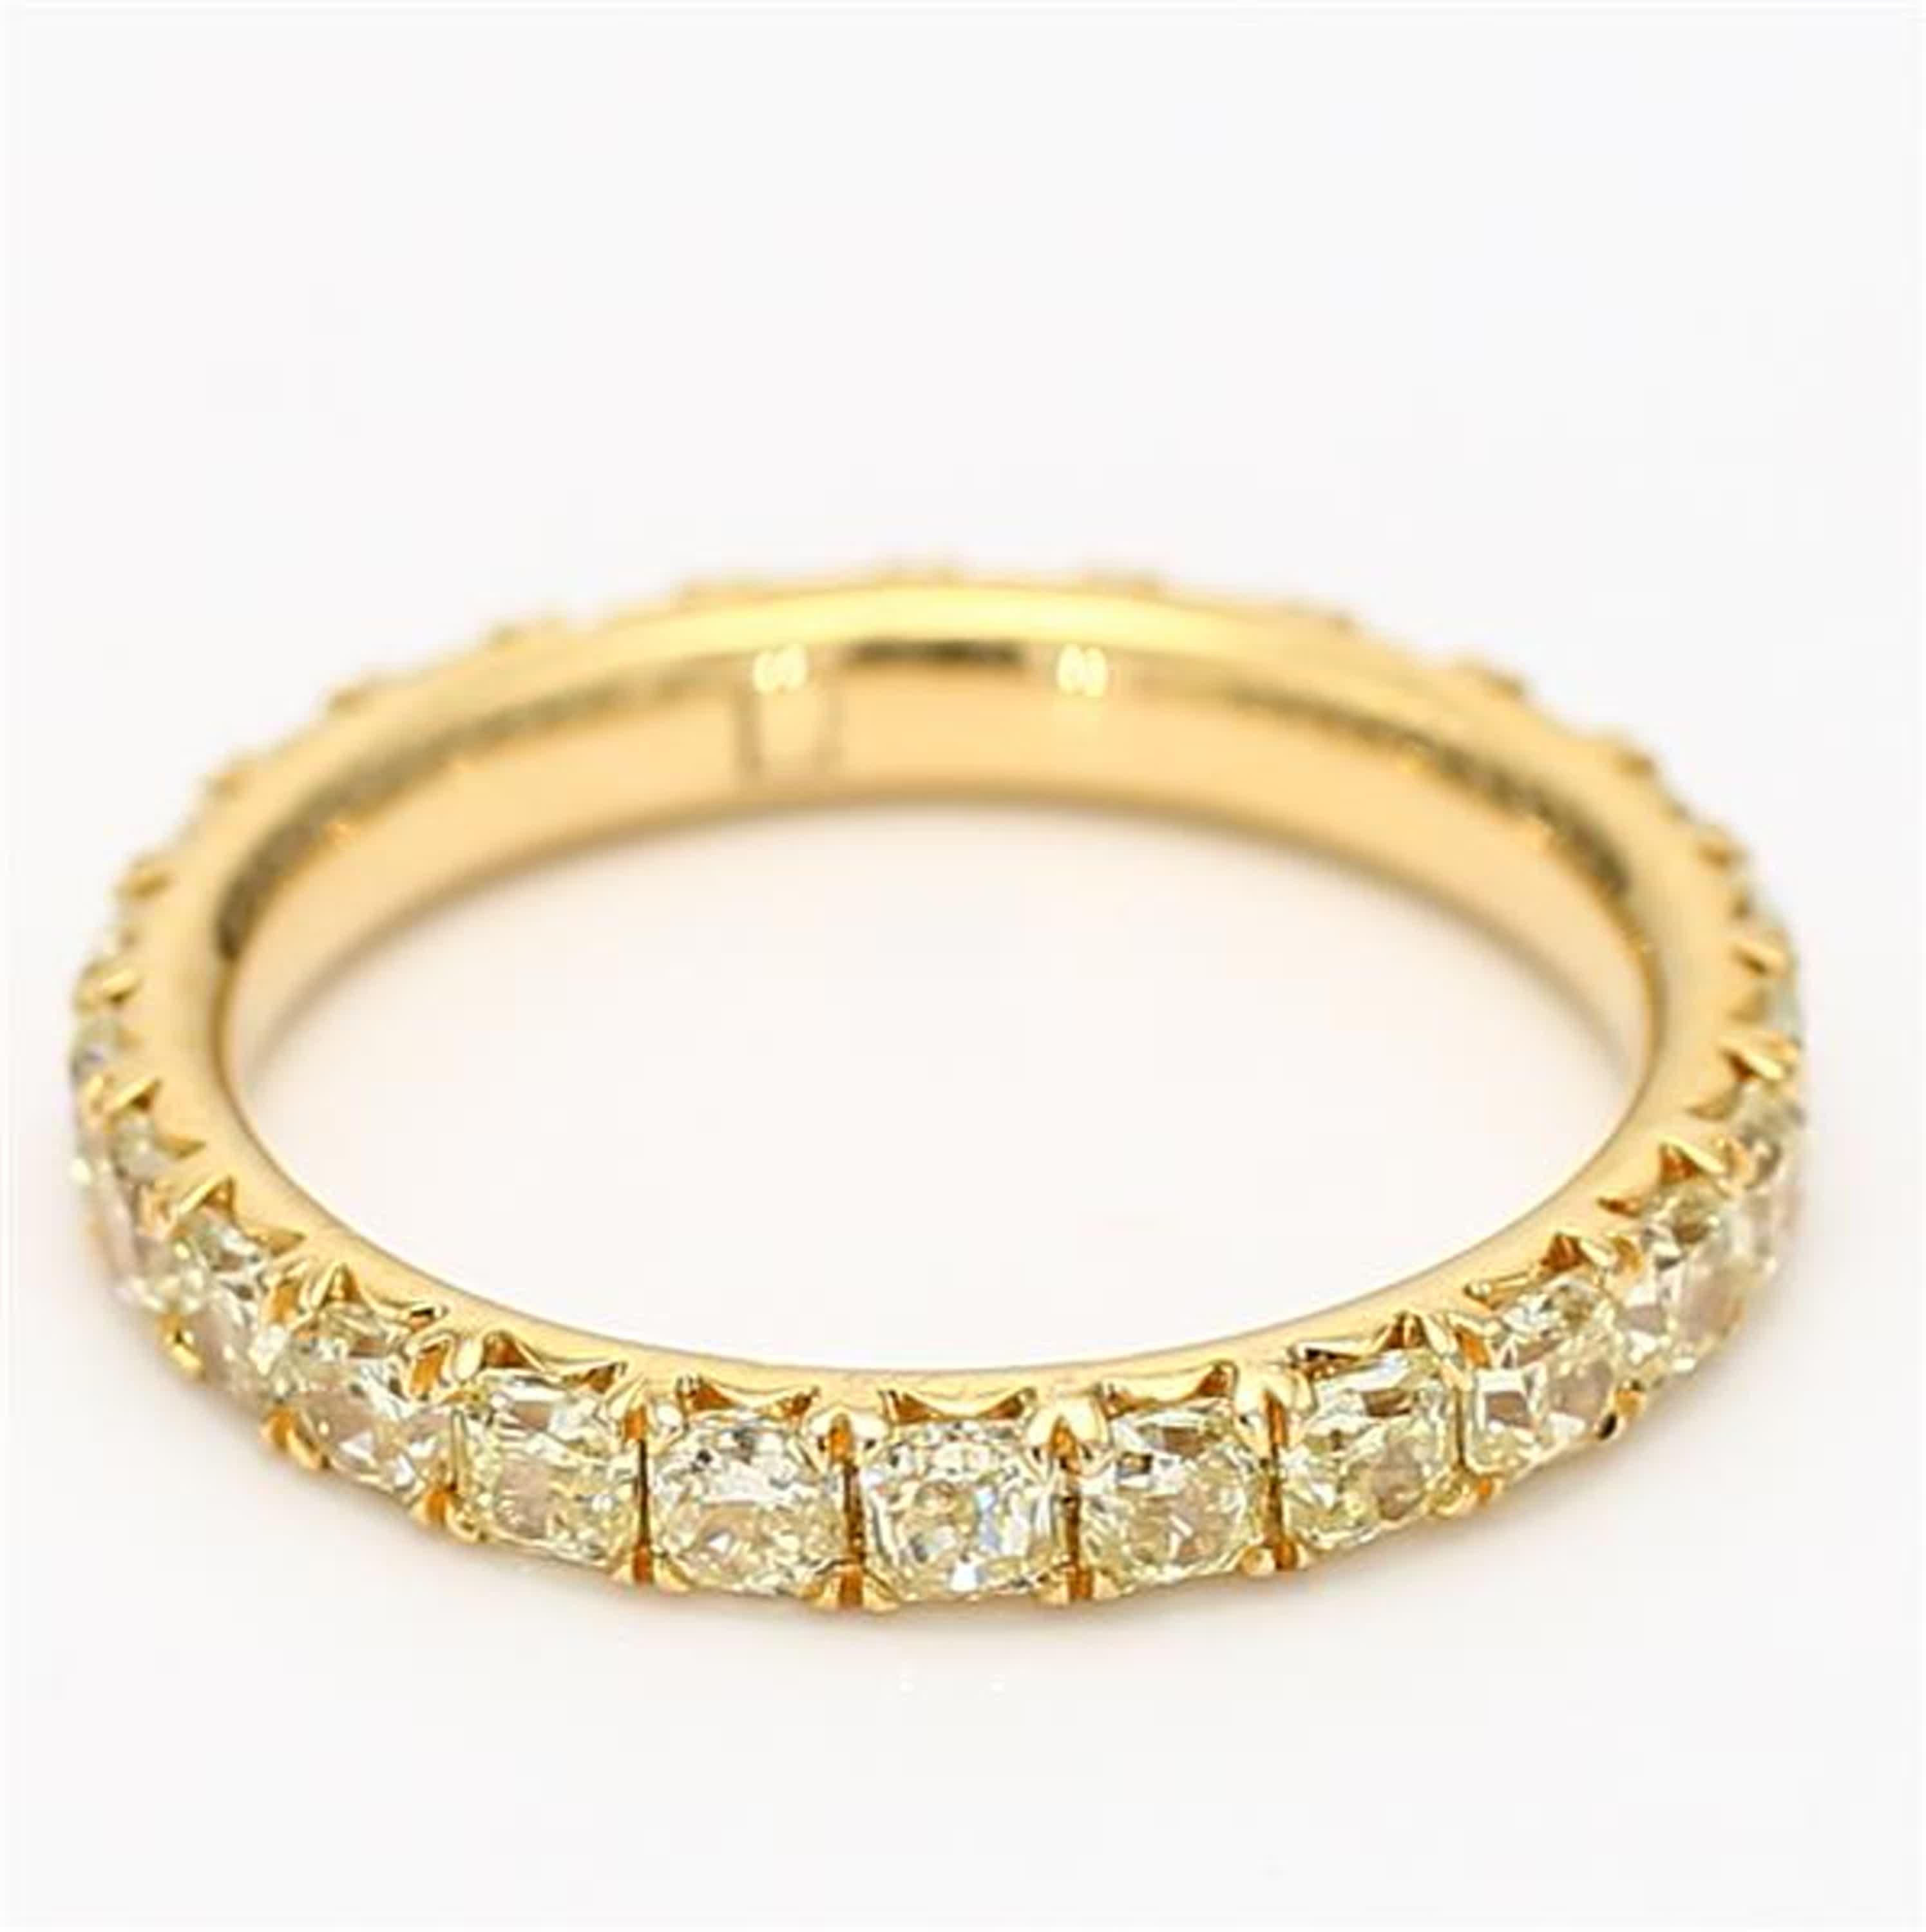 RareGemWorld's classic diamond band. Mounted in a beautiful 18K Yellow Gold setting with natural radiant yellow diamond's. This eternity band is guaranteed to impress and enhance your personal collection!

Total Weight: 1.99cts

Diamond